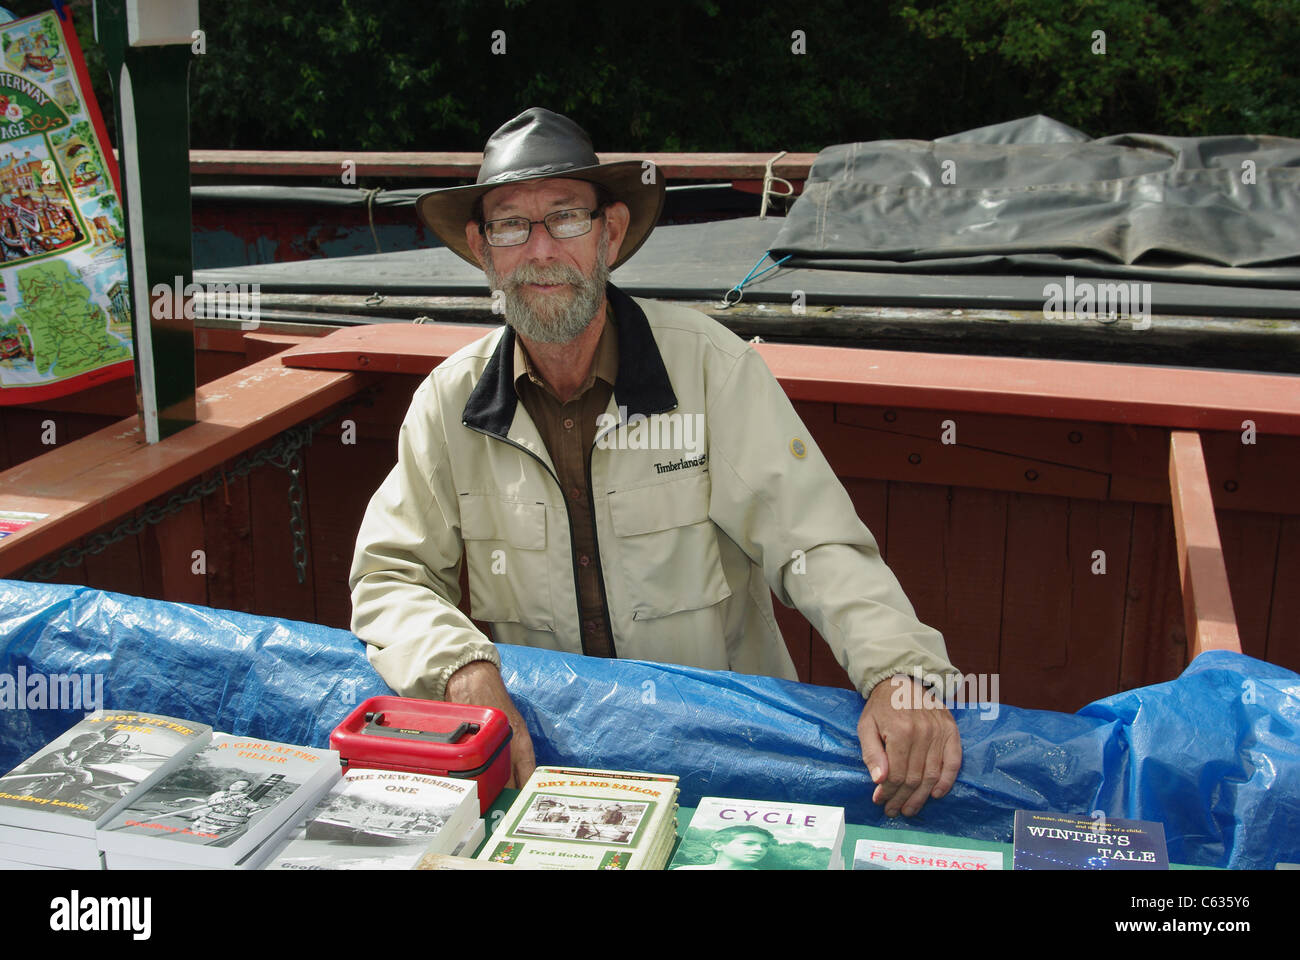 Local author Geoffrey Lewis selling his work from the narrowboat 'Raymond' at the Blisworth Canal Festival, 2011 Stock Photo